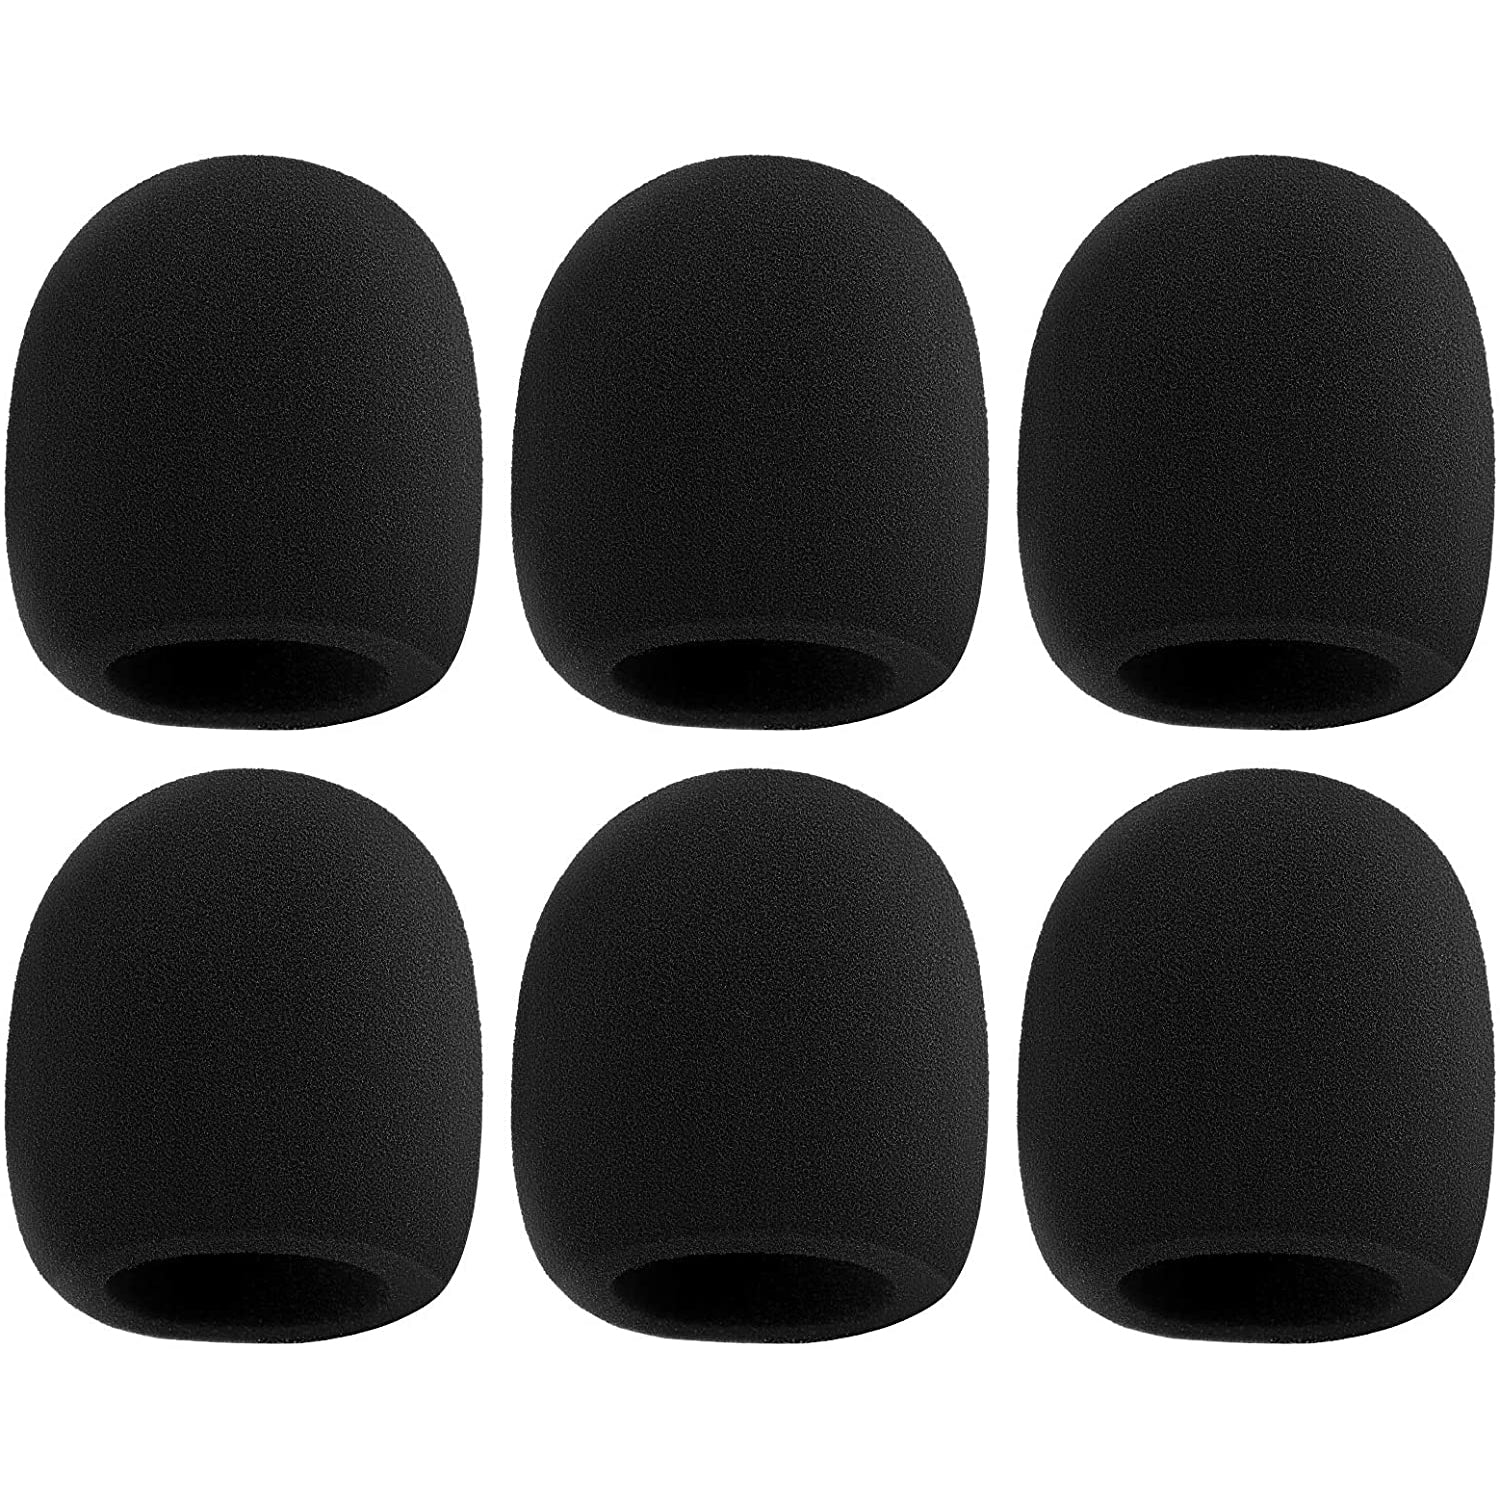 

Moukey MFCH6 Microphone Handheld Covers Foam 6-Packs for SM58/E835